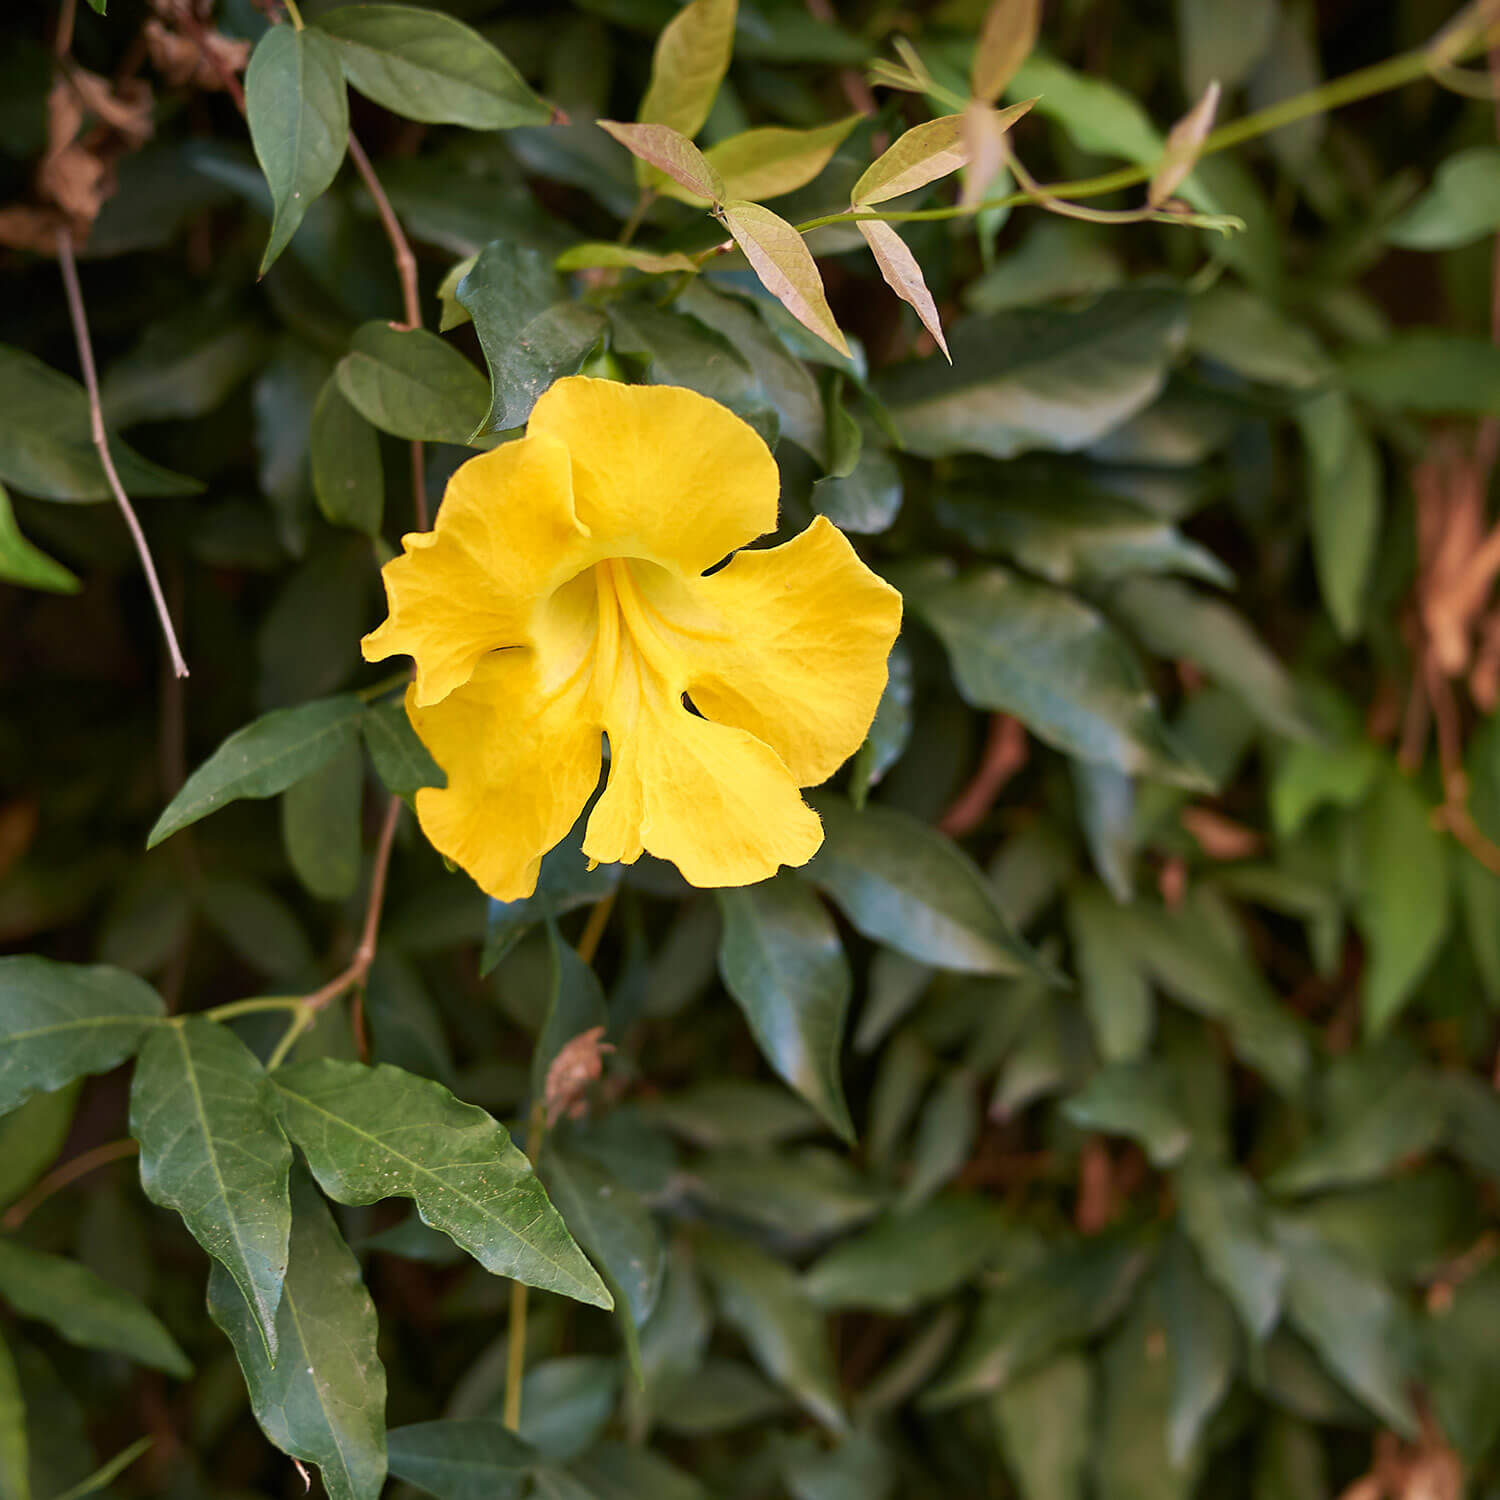 Blooming yellow from from a Macfadyena unguis-cati, Yellow Trumpet Vine